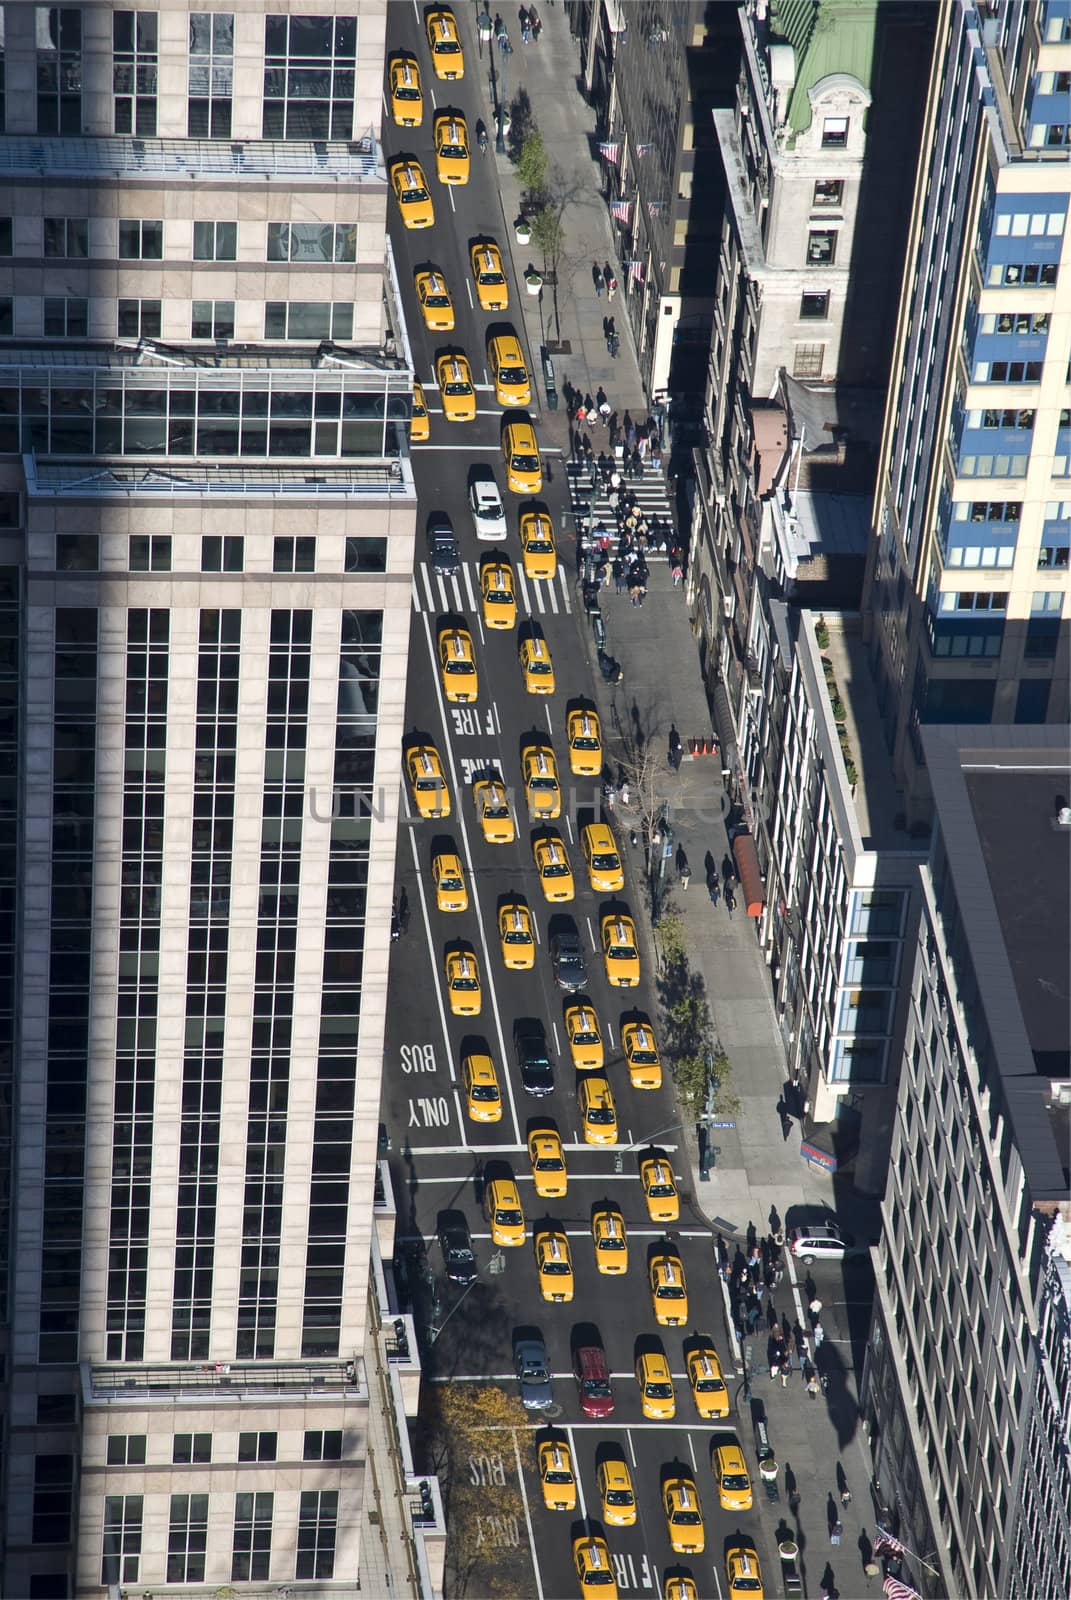 The New York taxi by hanusst